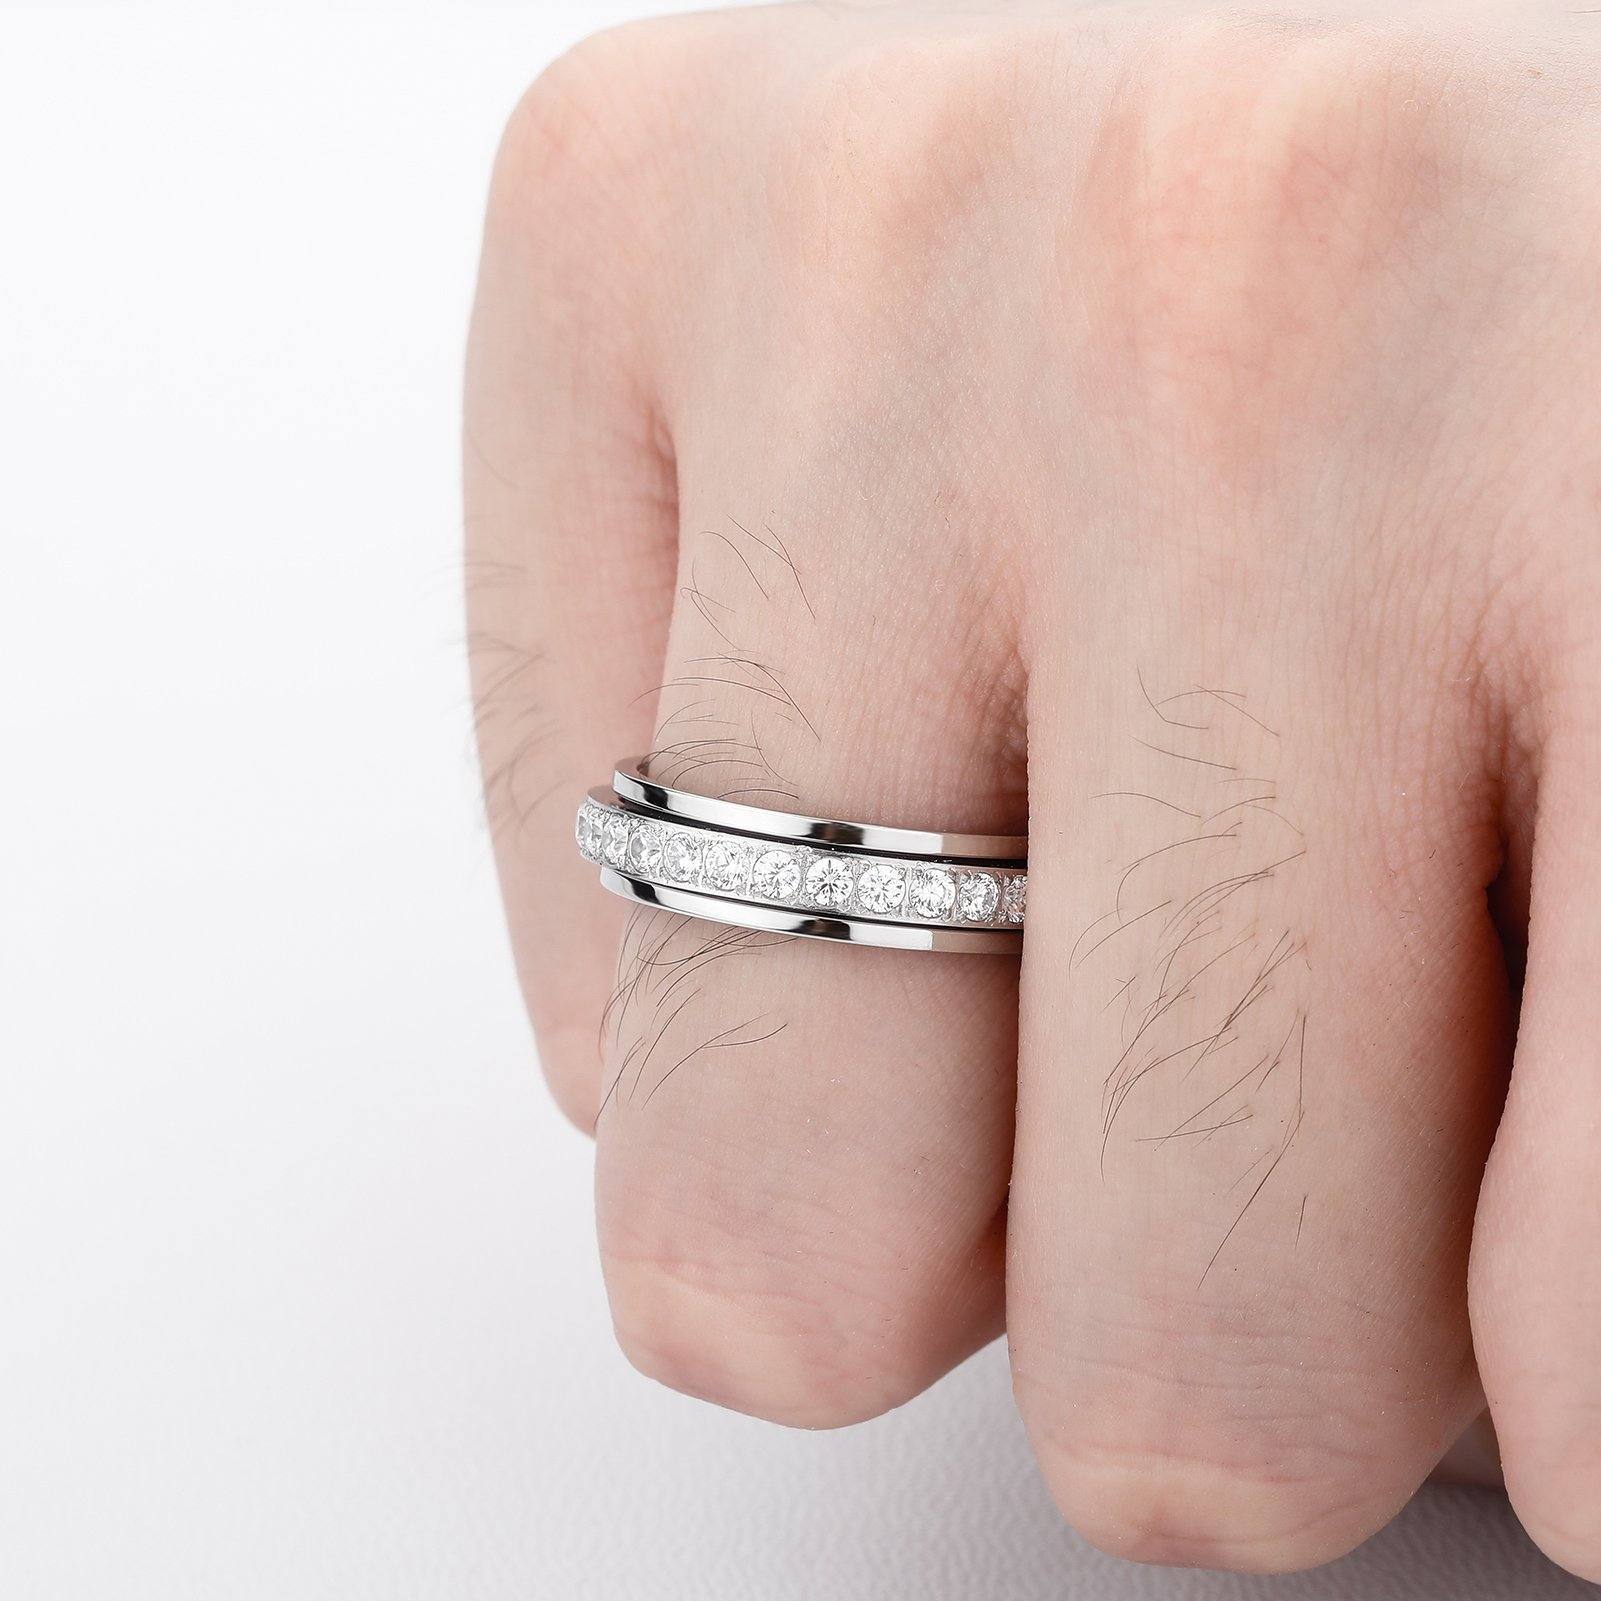 Single Baguette Row Rings - Sliver - Alliceonyou